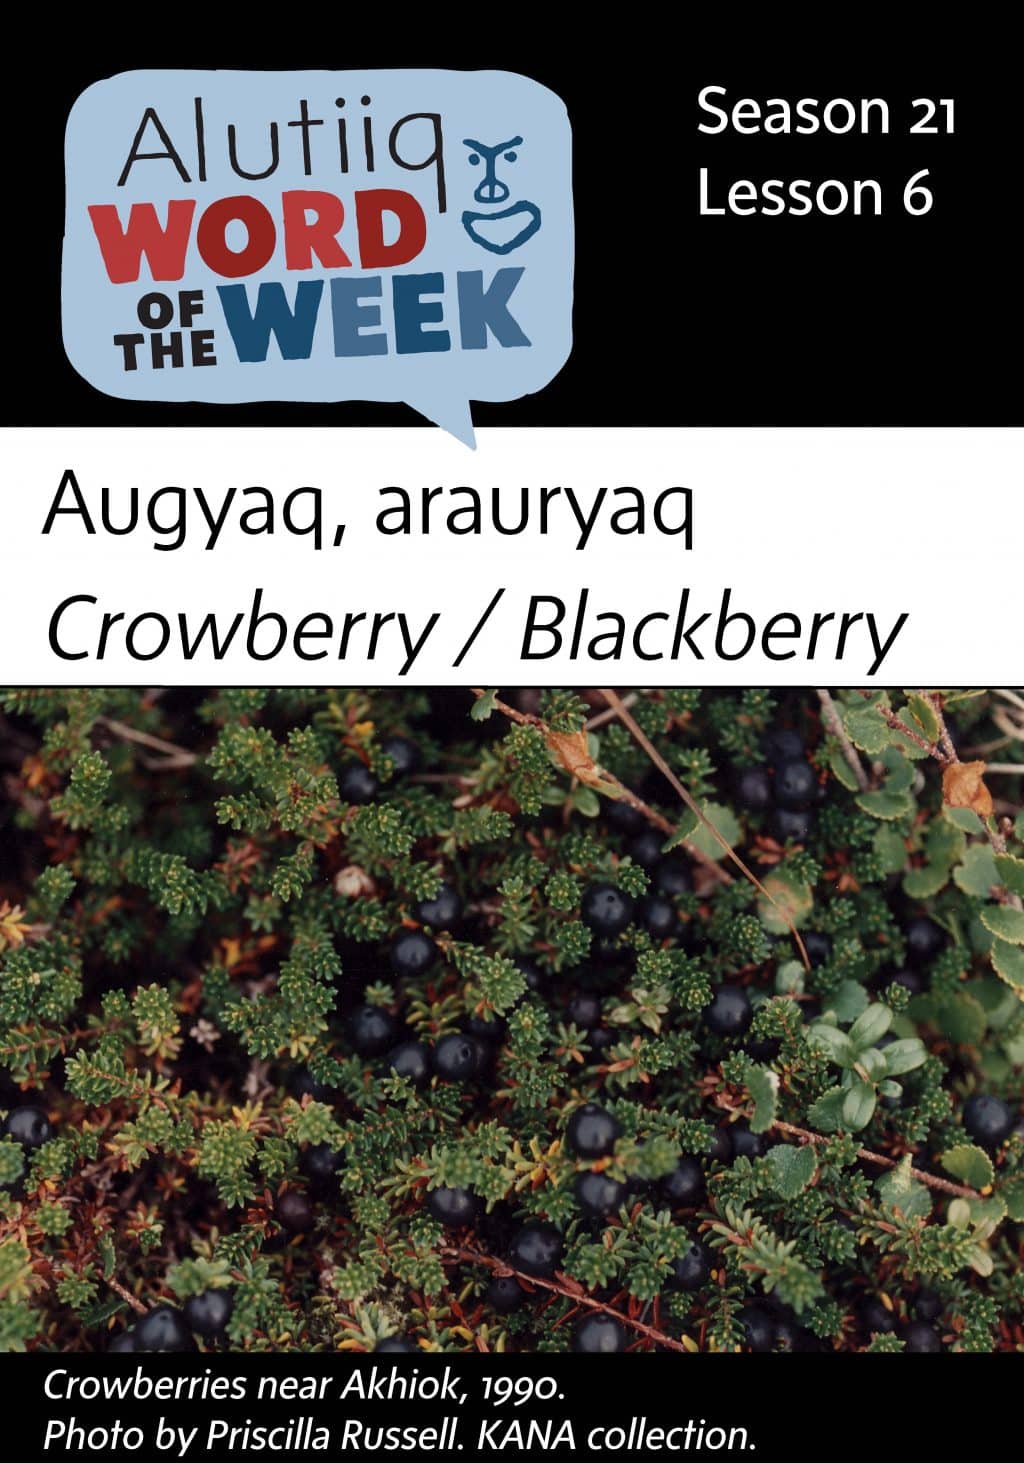 Crow/Blackberry-Alutiiq Word of the Week-August 5th